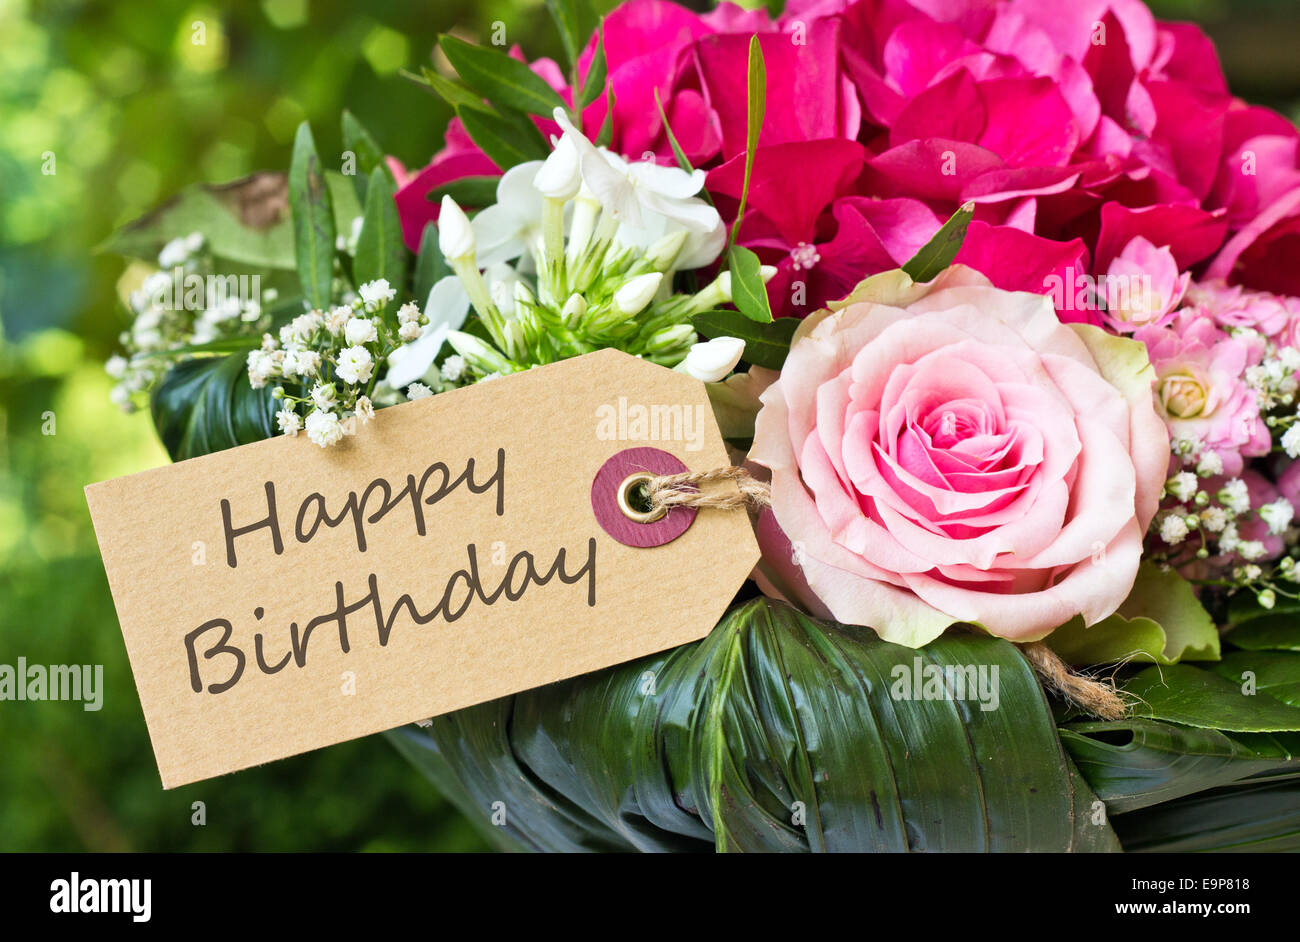 English Birthday Card With Pink Flowers Stock Photo Alamy